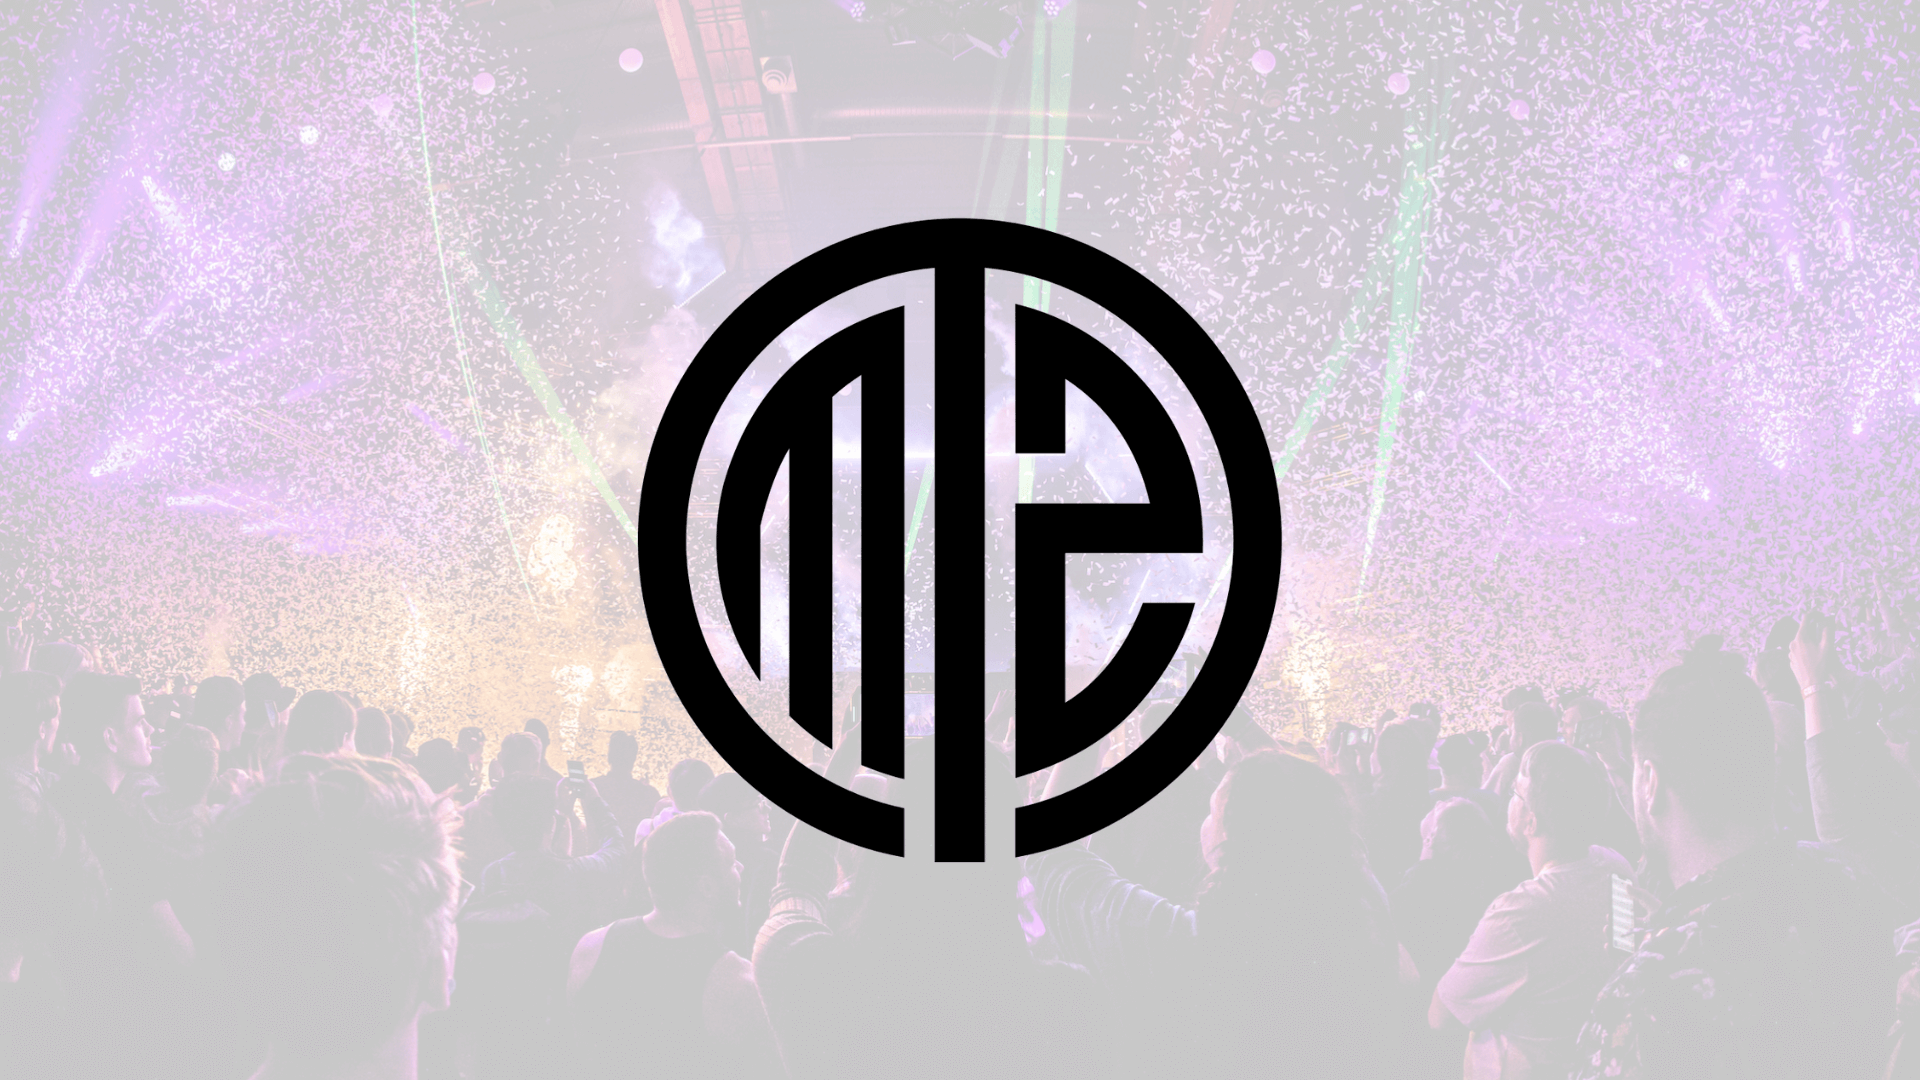 TSM confirms a LCS departure and plans to join a new region